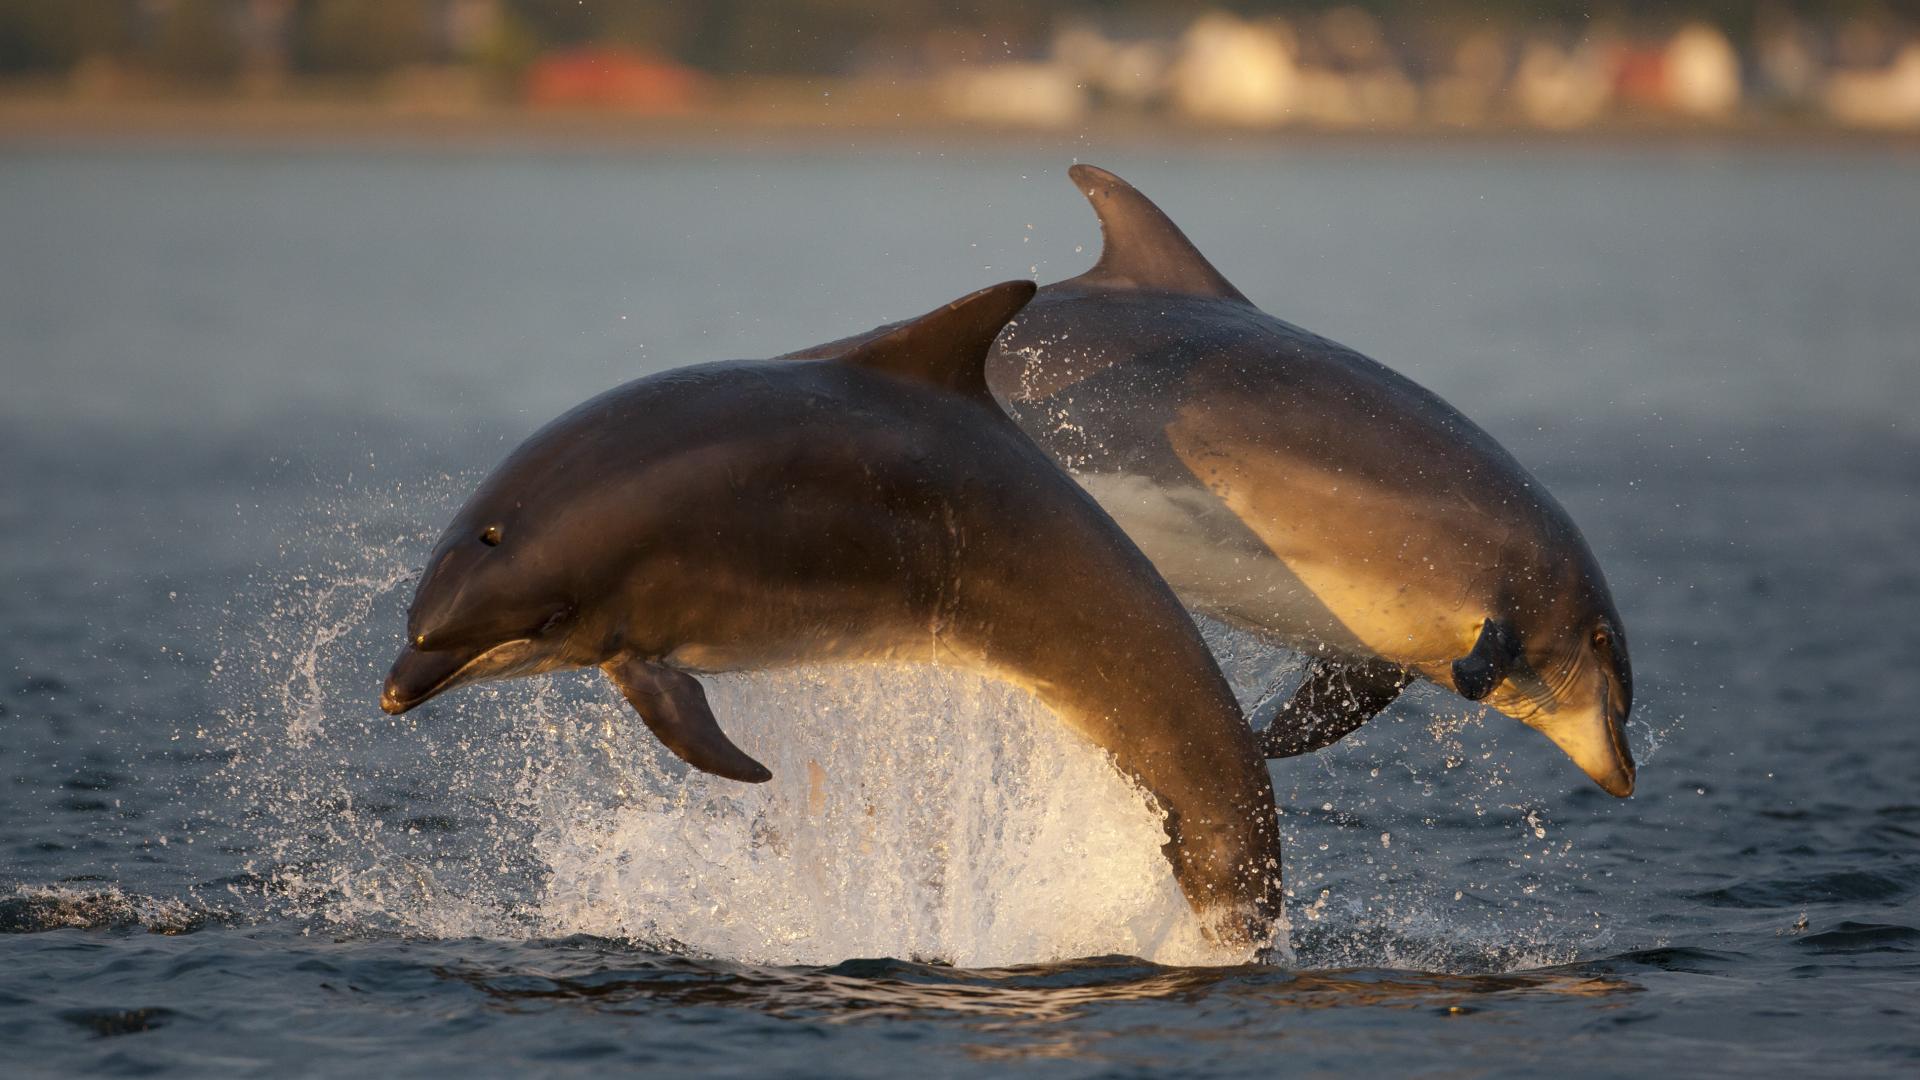 Two bottlenose dolphins diving with arched backs in opposite directions in the Moray Firth, Scotland